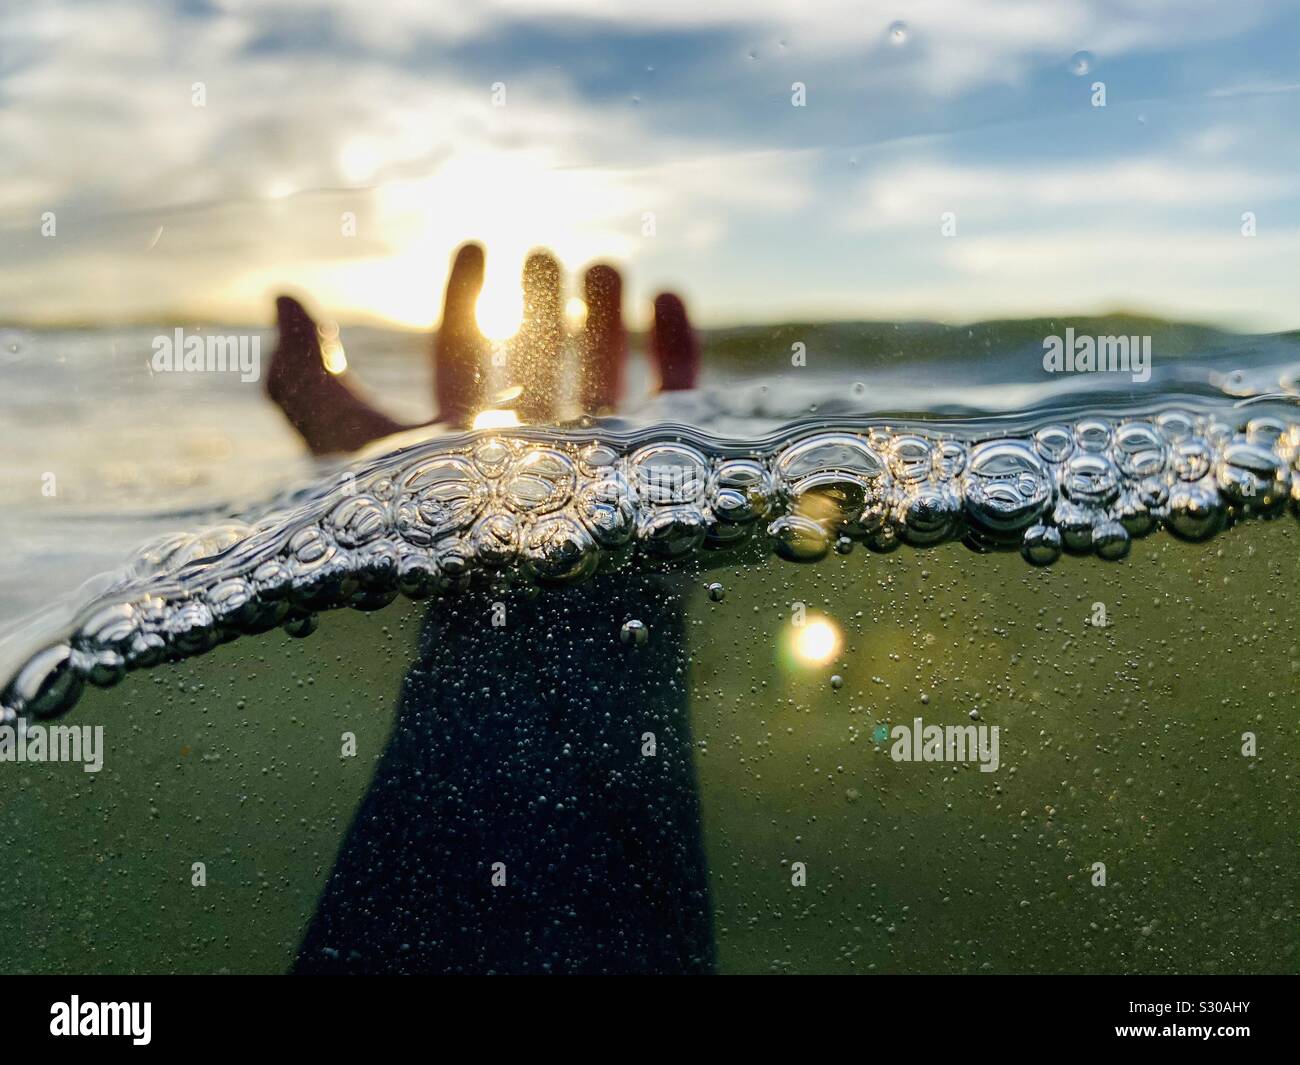 A over-under photo of a left hand coming out of the water. Stock Photo